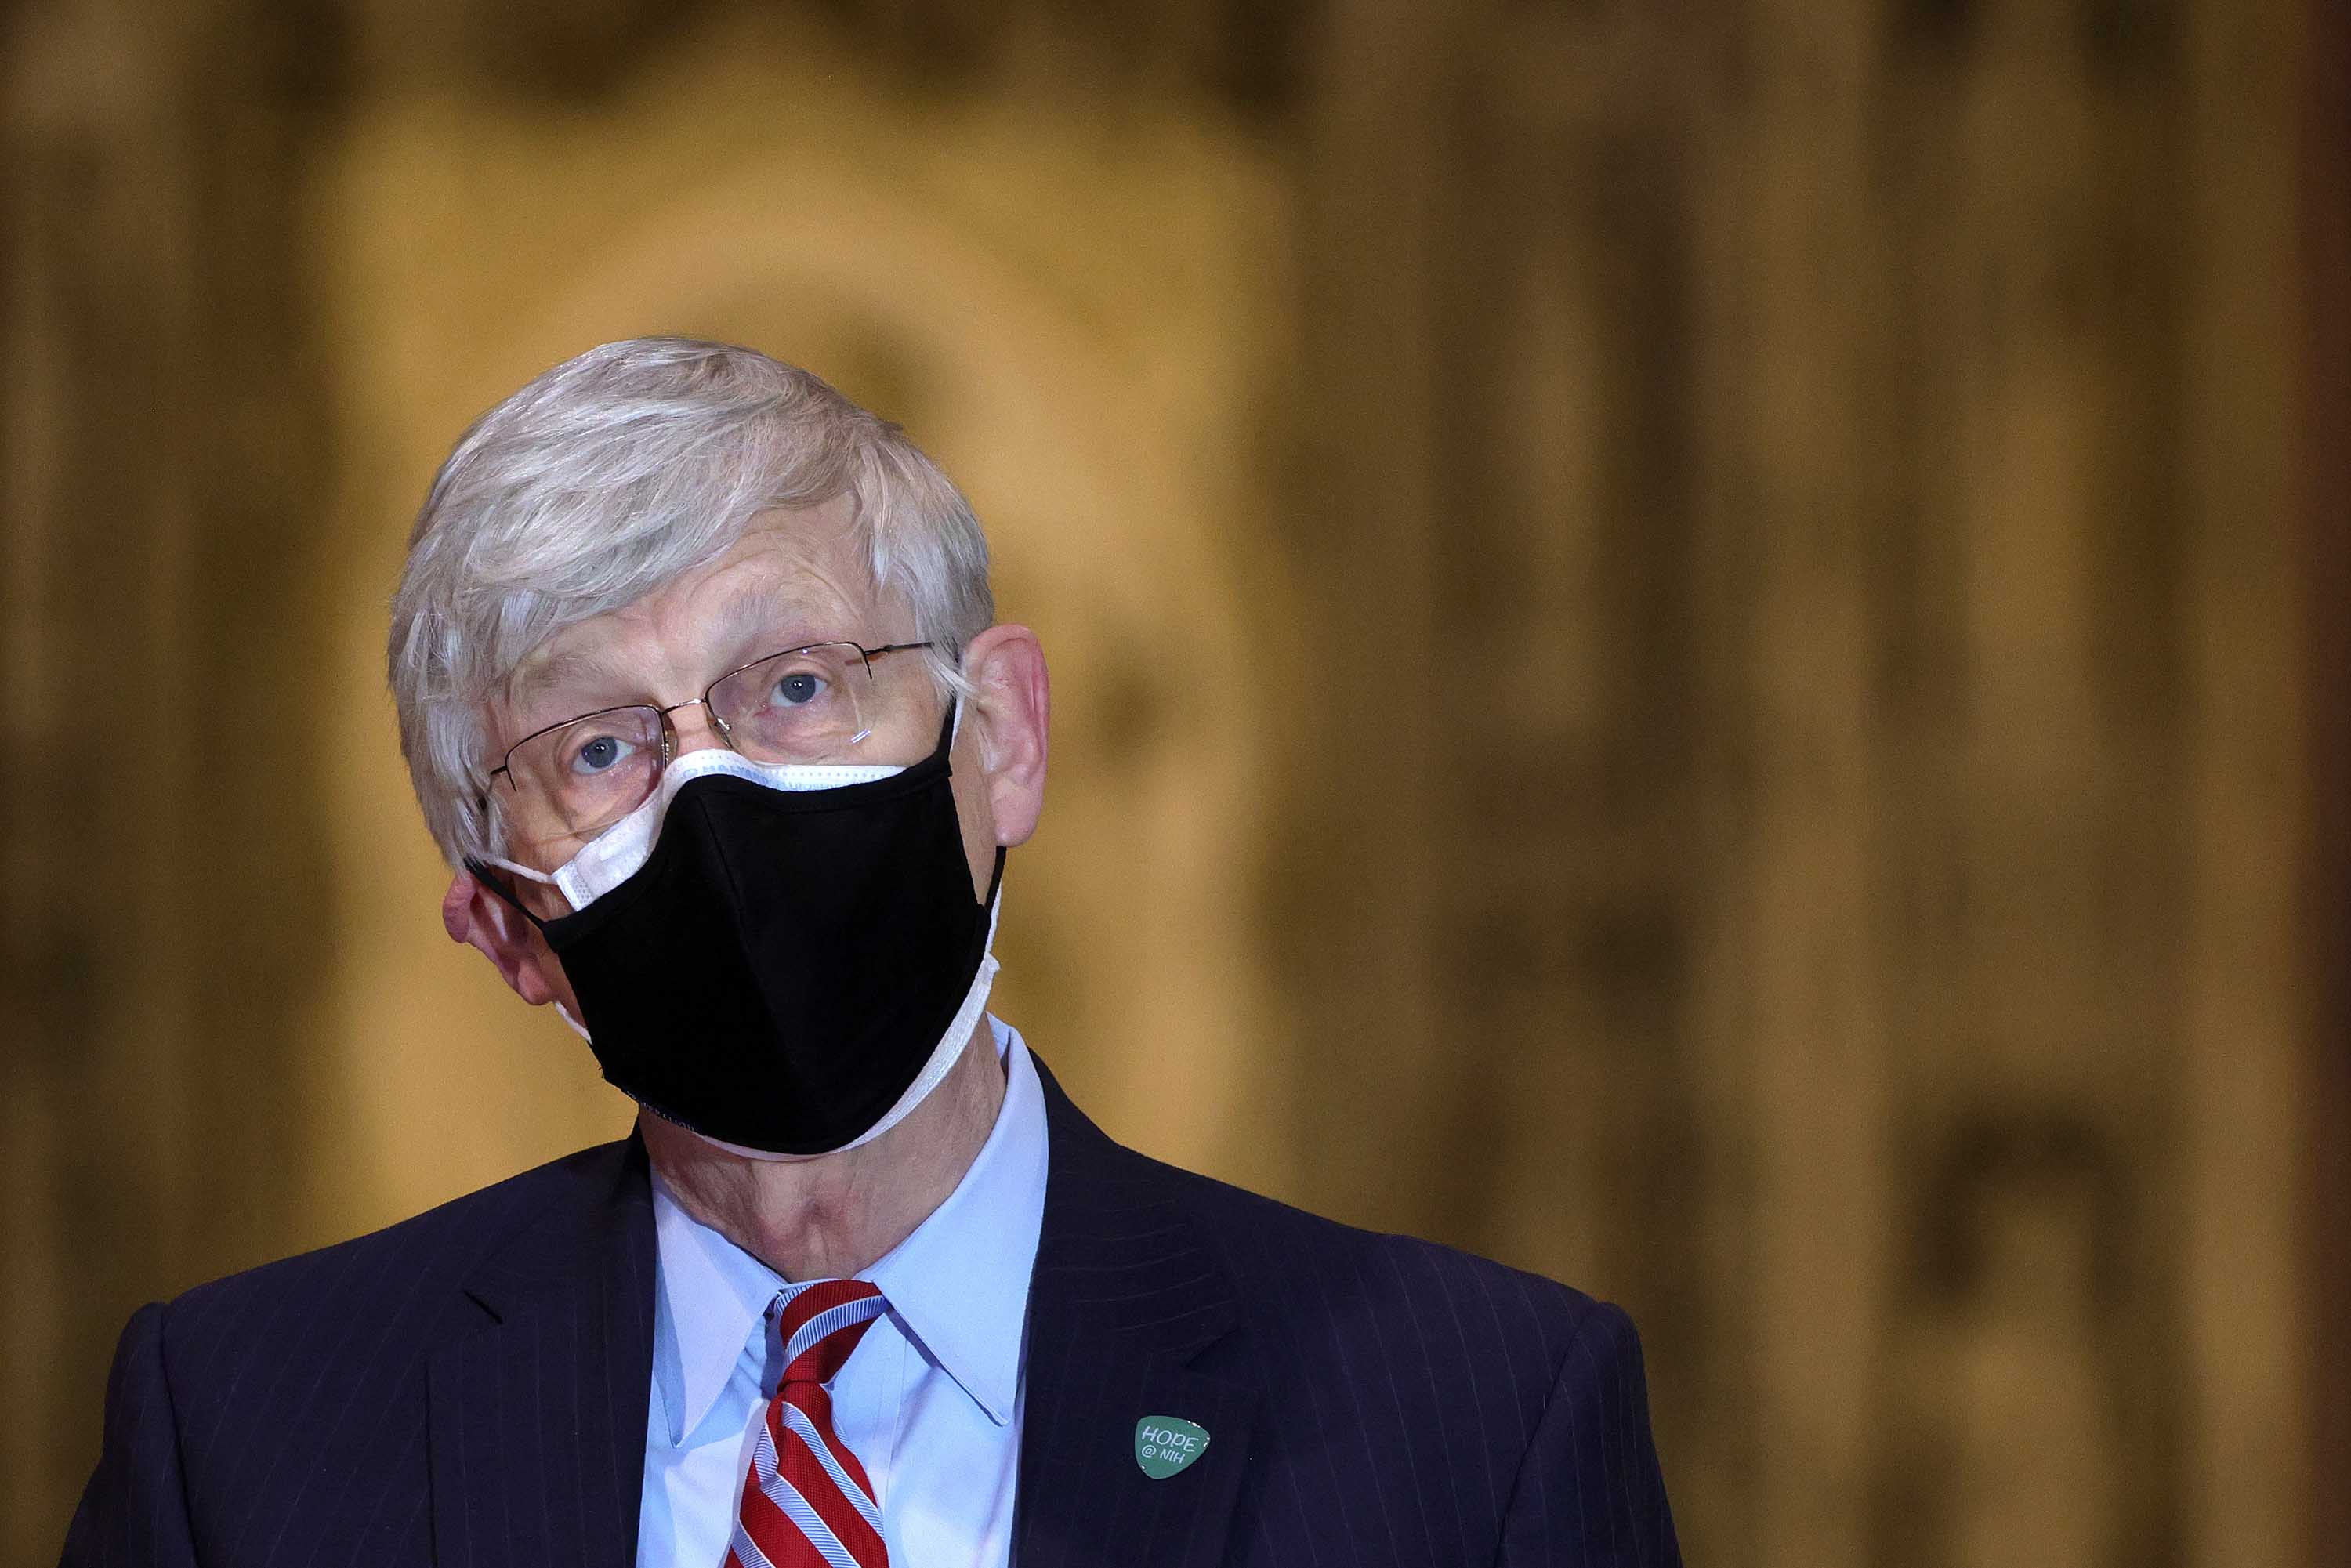 National Institutes of Health Director Dr. Francis Collins speaks during a public vaccination event in Washington, DC, on March 16.